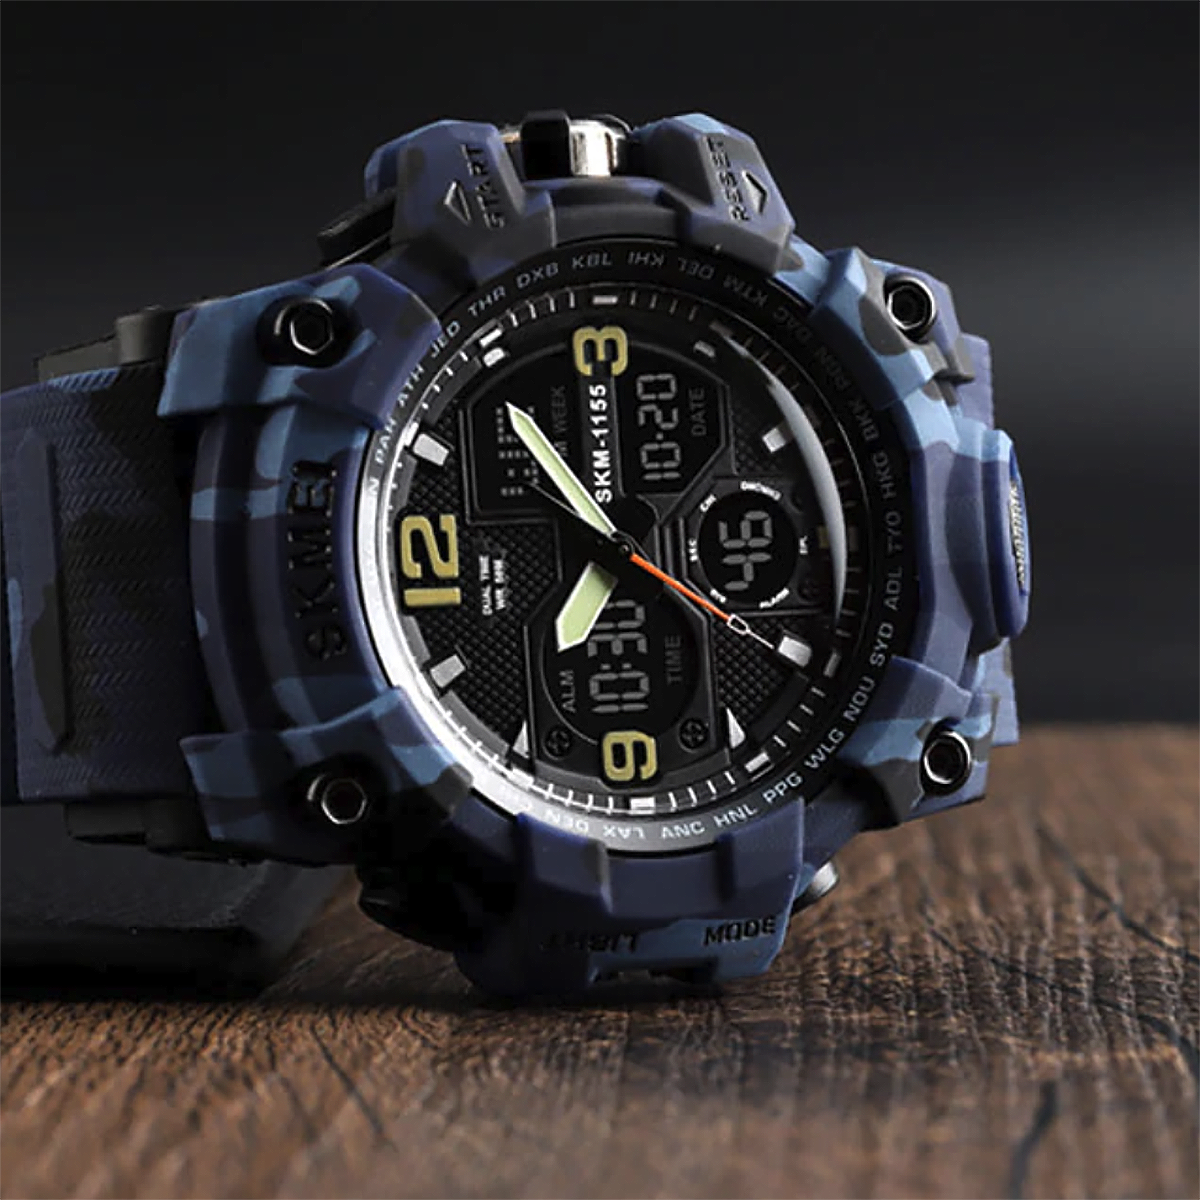 Camouflage Military Watch - SKMEI CAM19